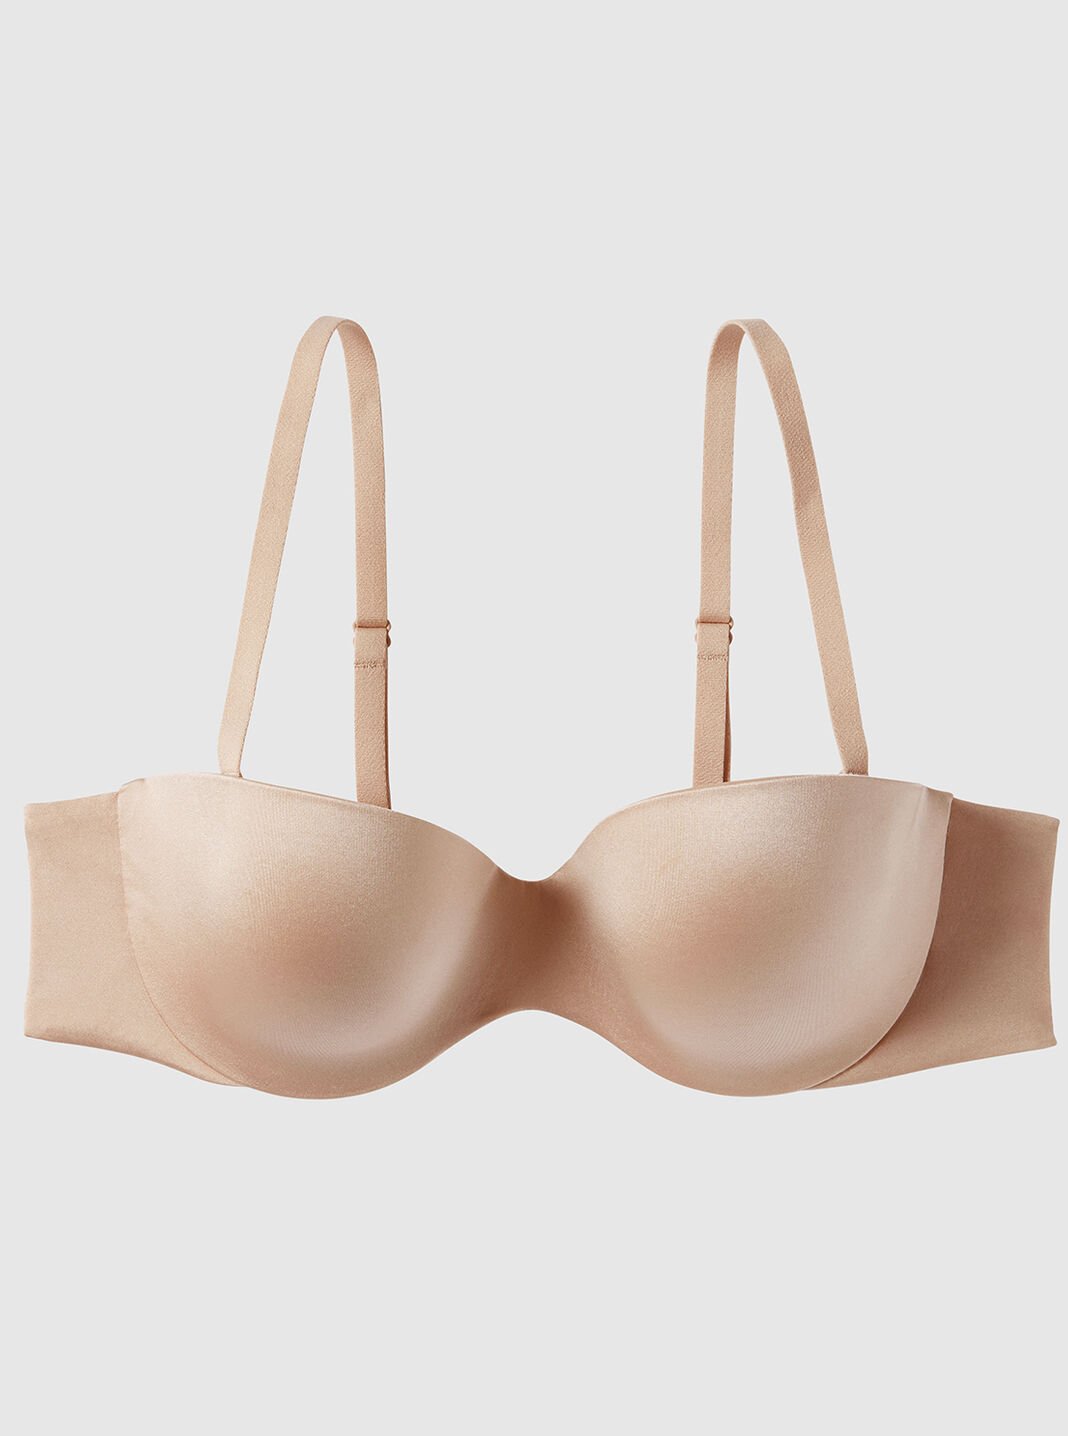 Refined 6 Way Low Cut Convertible Strapless Bra in Nude